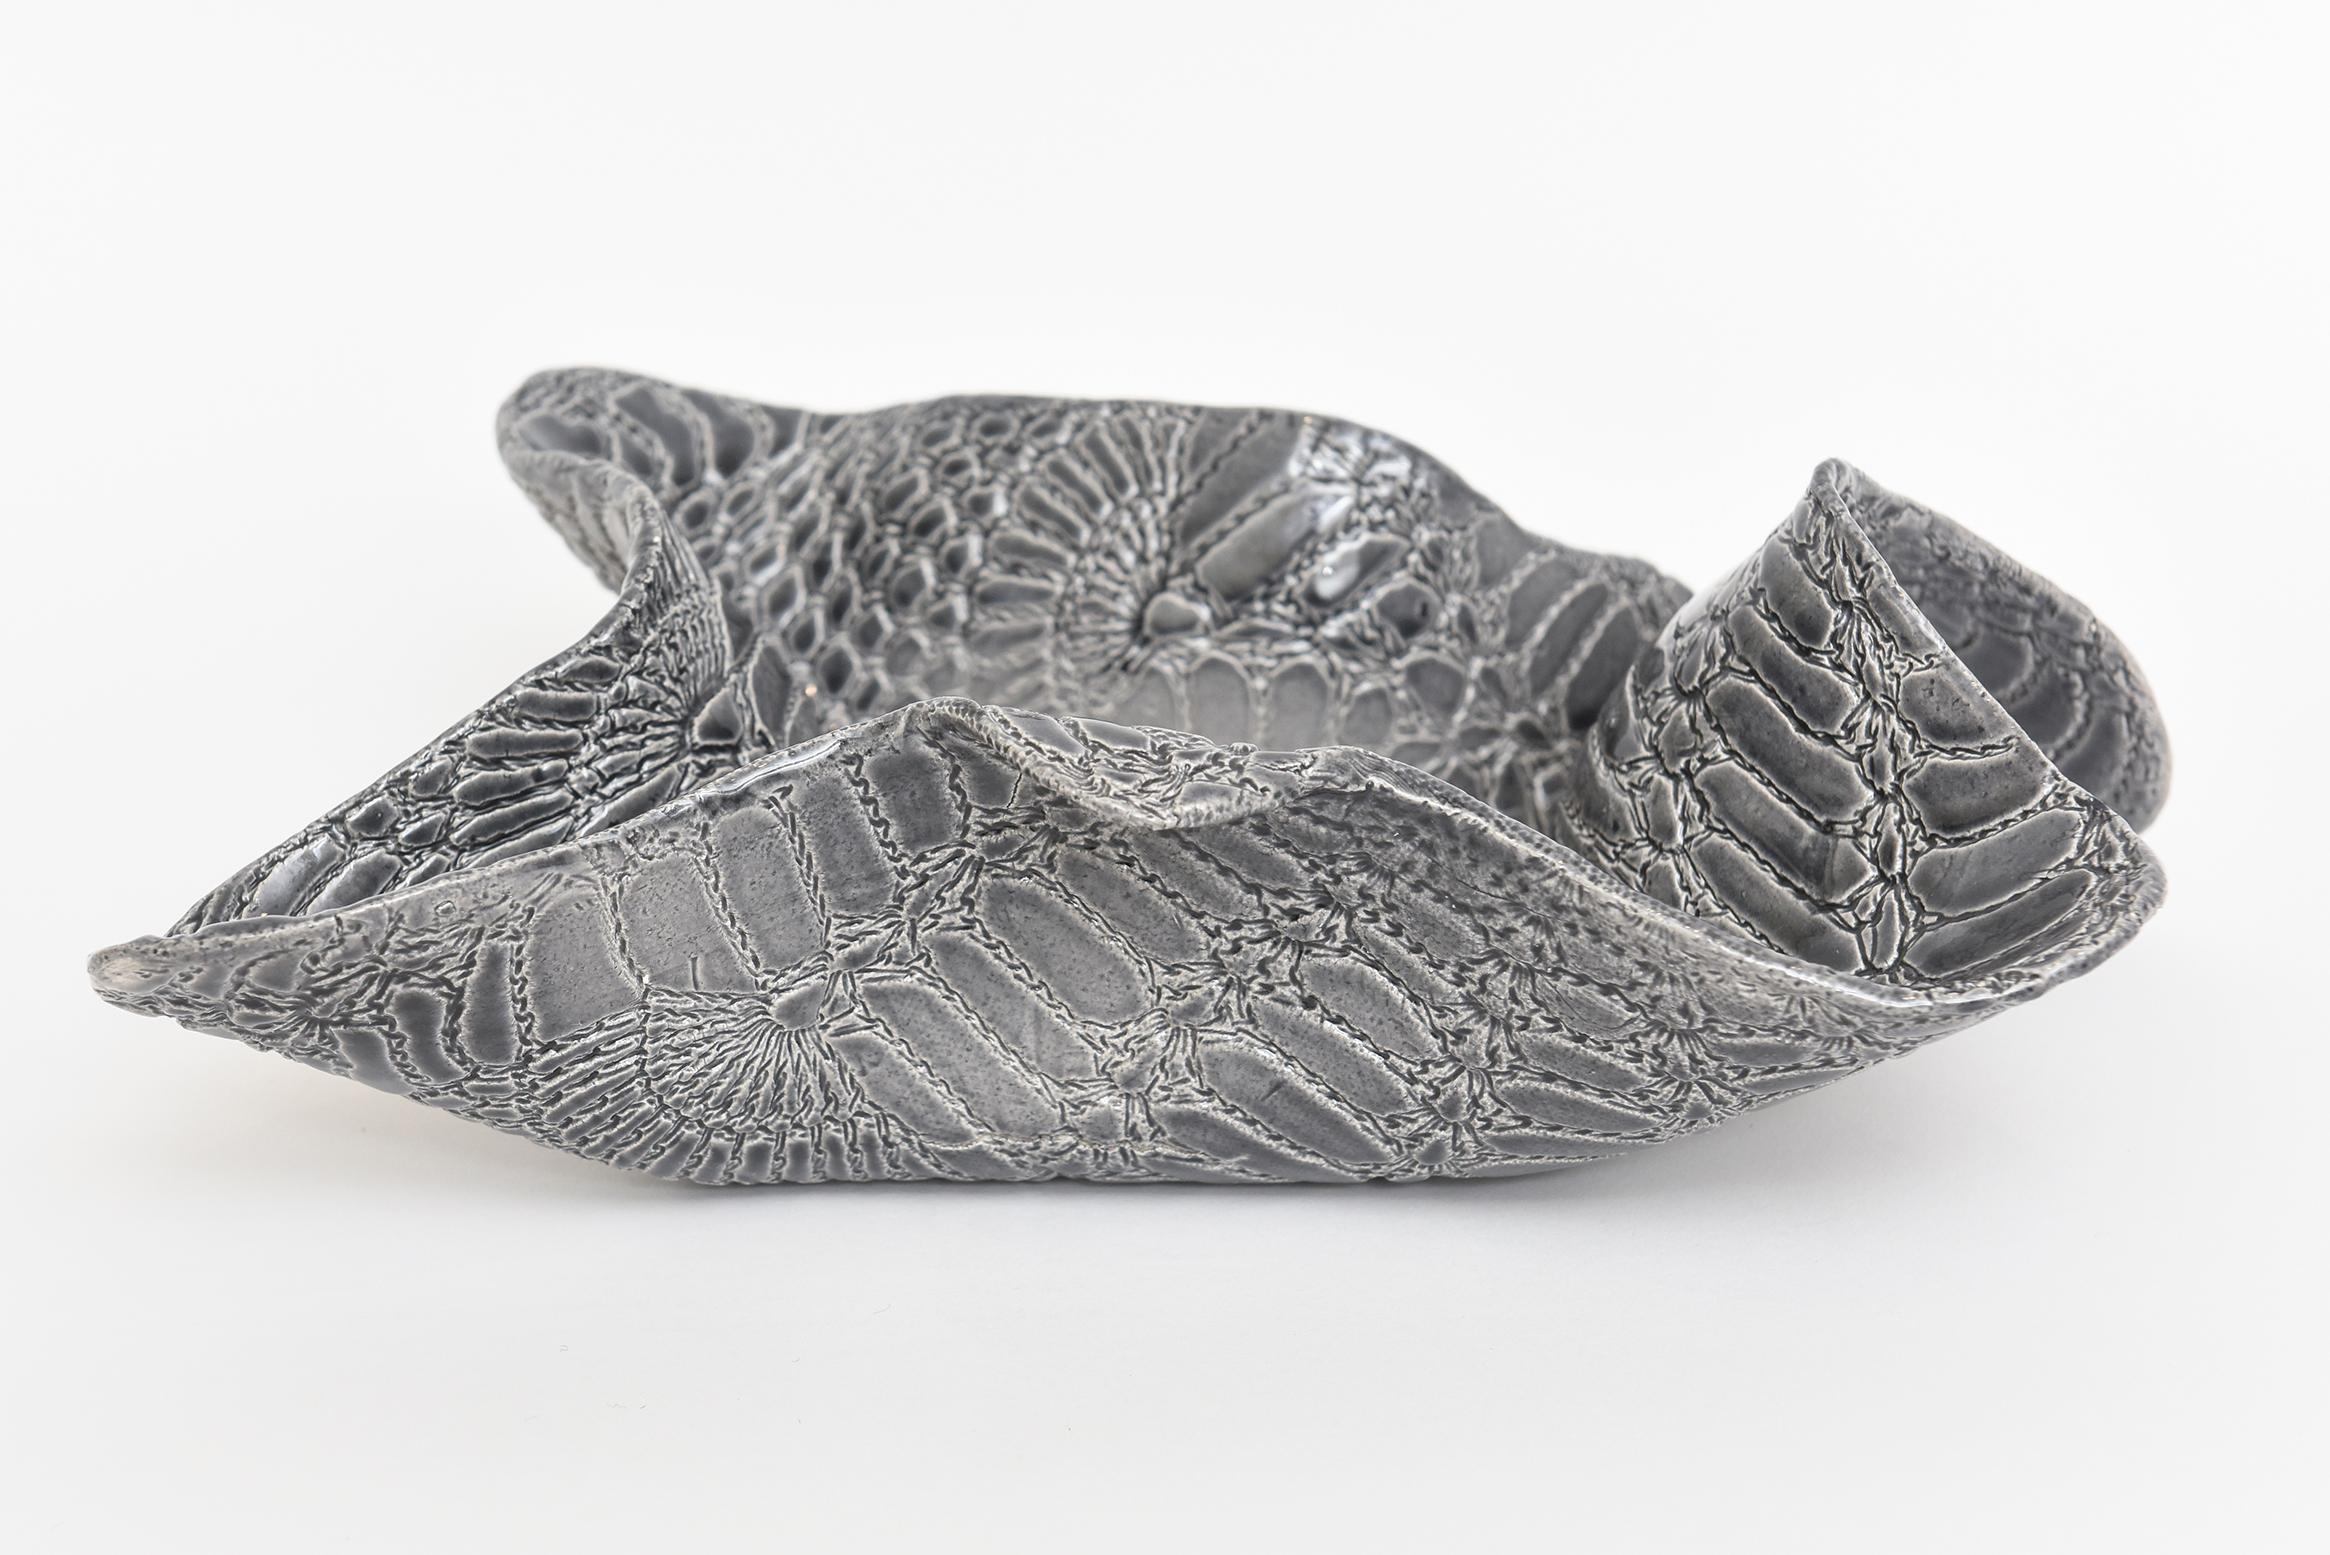 This amazing textural snakeskin patterned ceramic bowl is vintage and has colorations and hues of grays to charcoal grays to white outlines. It looks like glass. The biomorphic shape and sculptural entity makes for a fabulous bowl from every